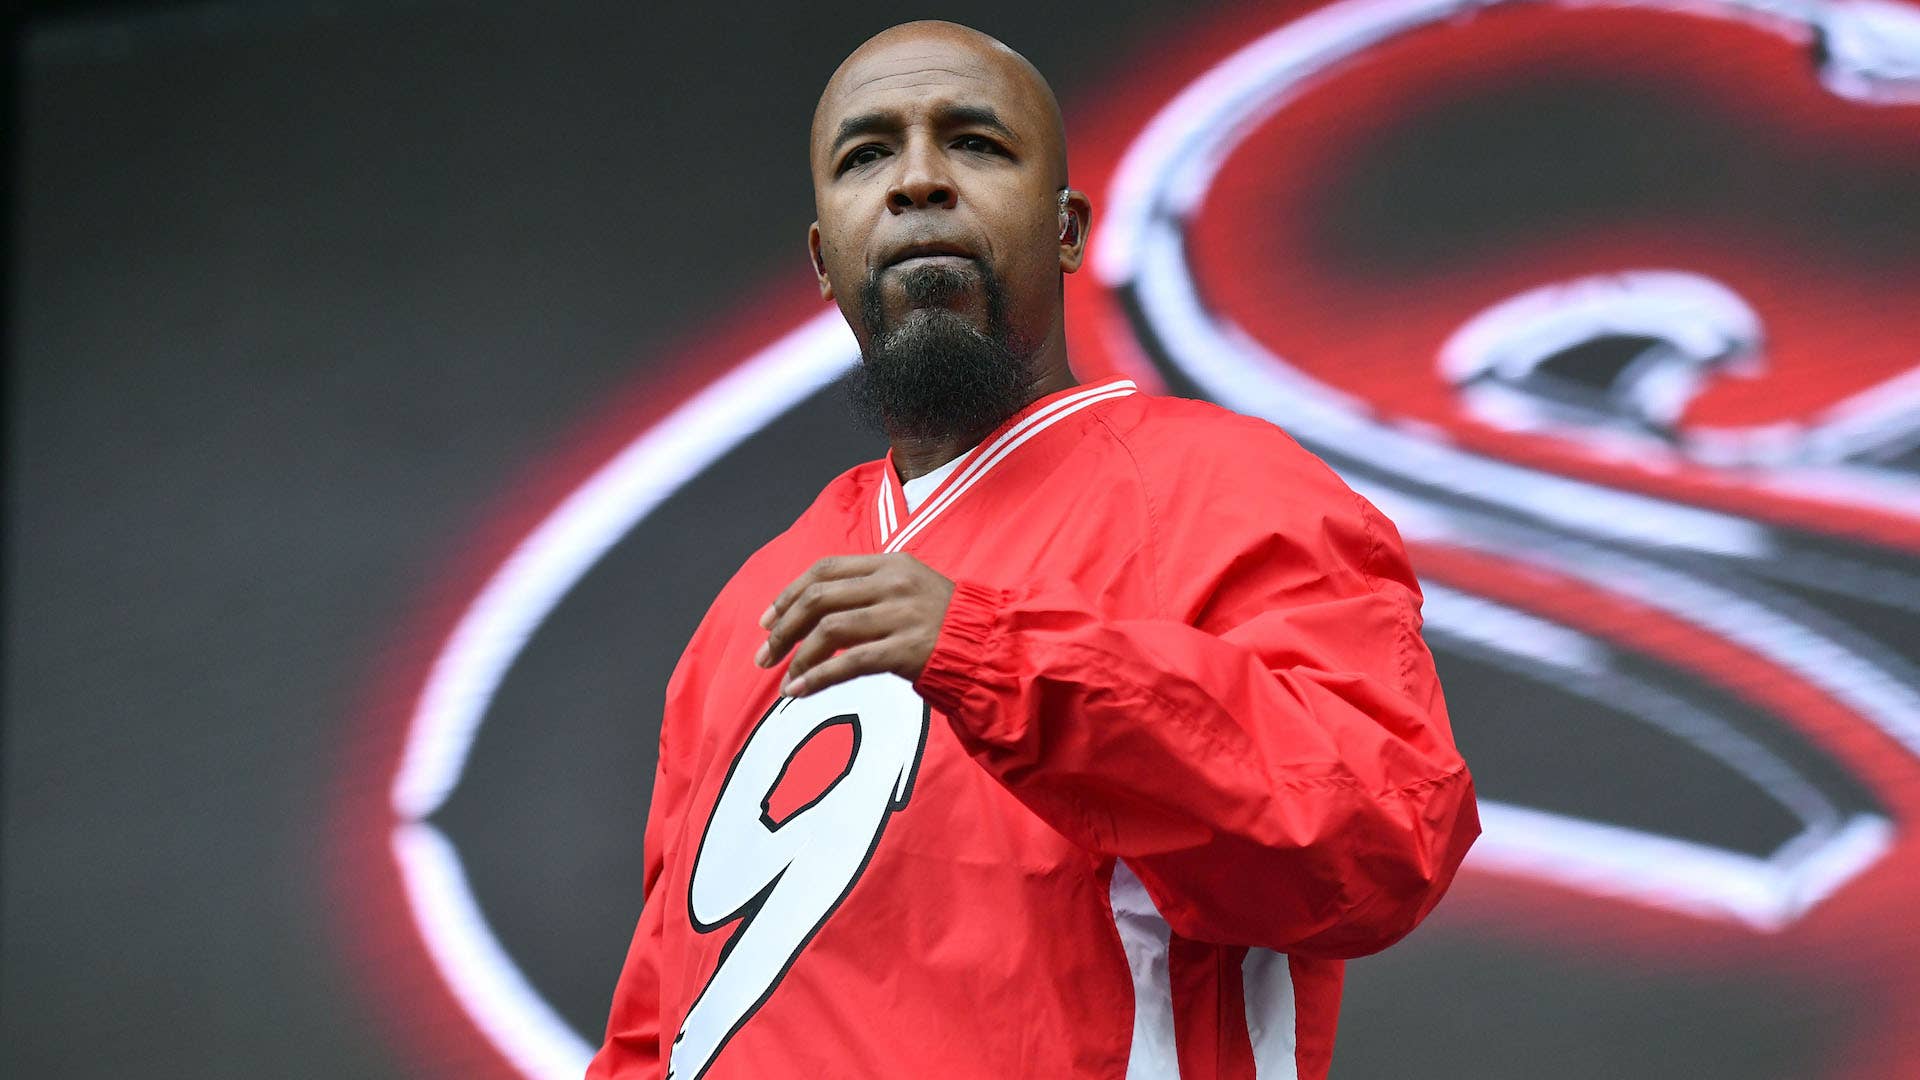 Tech N9ne performs onstage during the Power 106 Powerhouse festival.